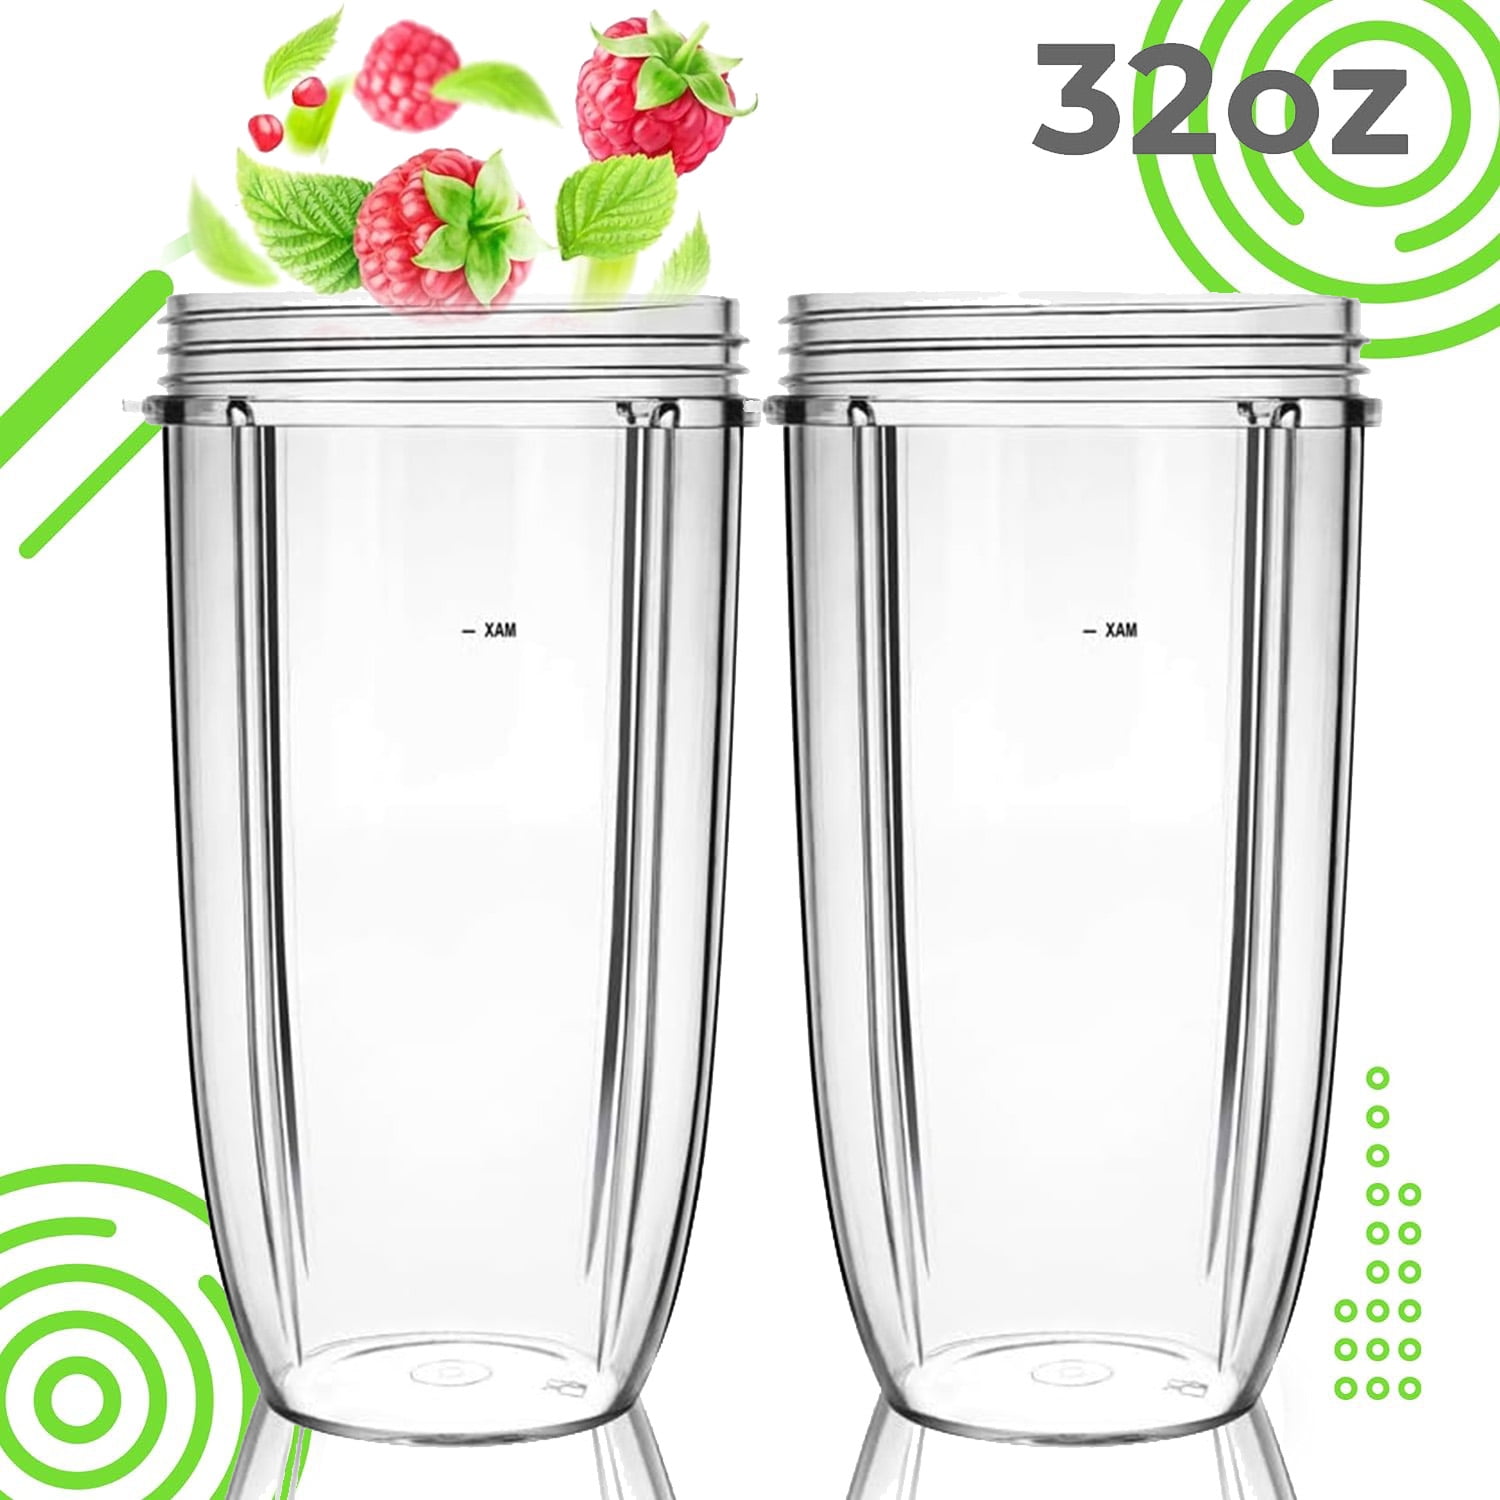 Meet Juice Replacement Parts 32oz Blender Cups (2 Packs) Replacement Blender Cups Compatible with Nutribullet 600W and 900W Blender